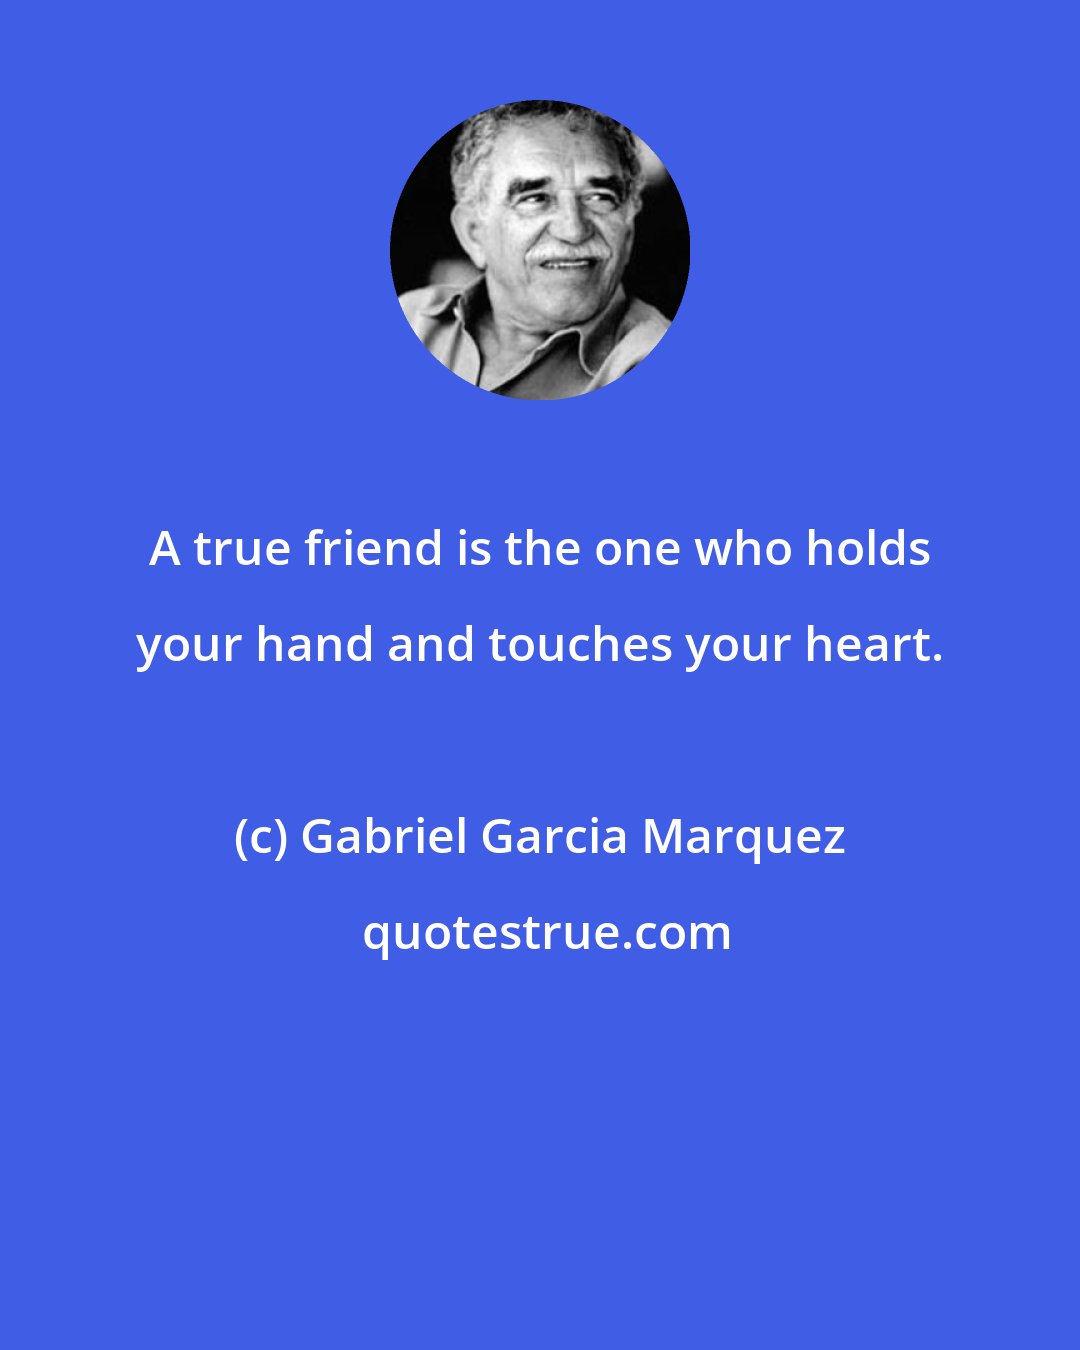 Gabriel Garcia Marquez: A true friend is the one who holds your hand and touches your heart.